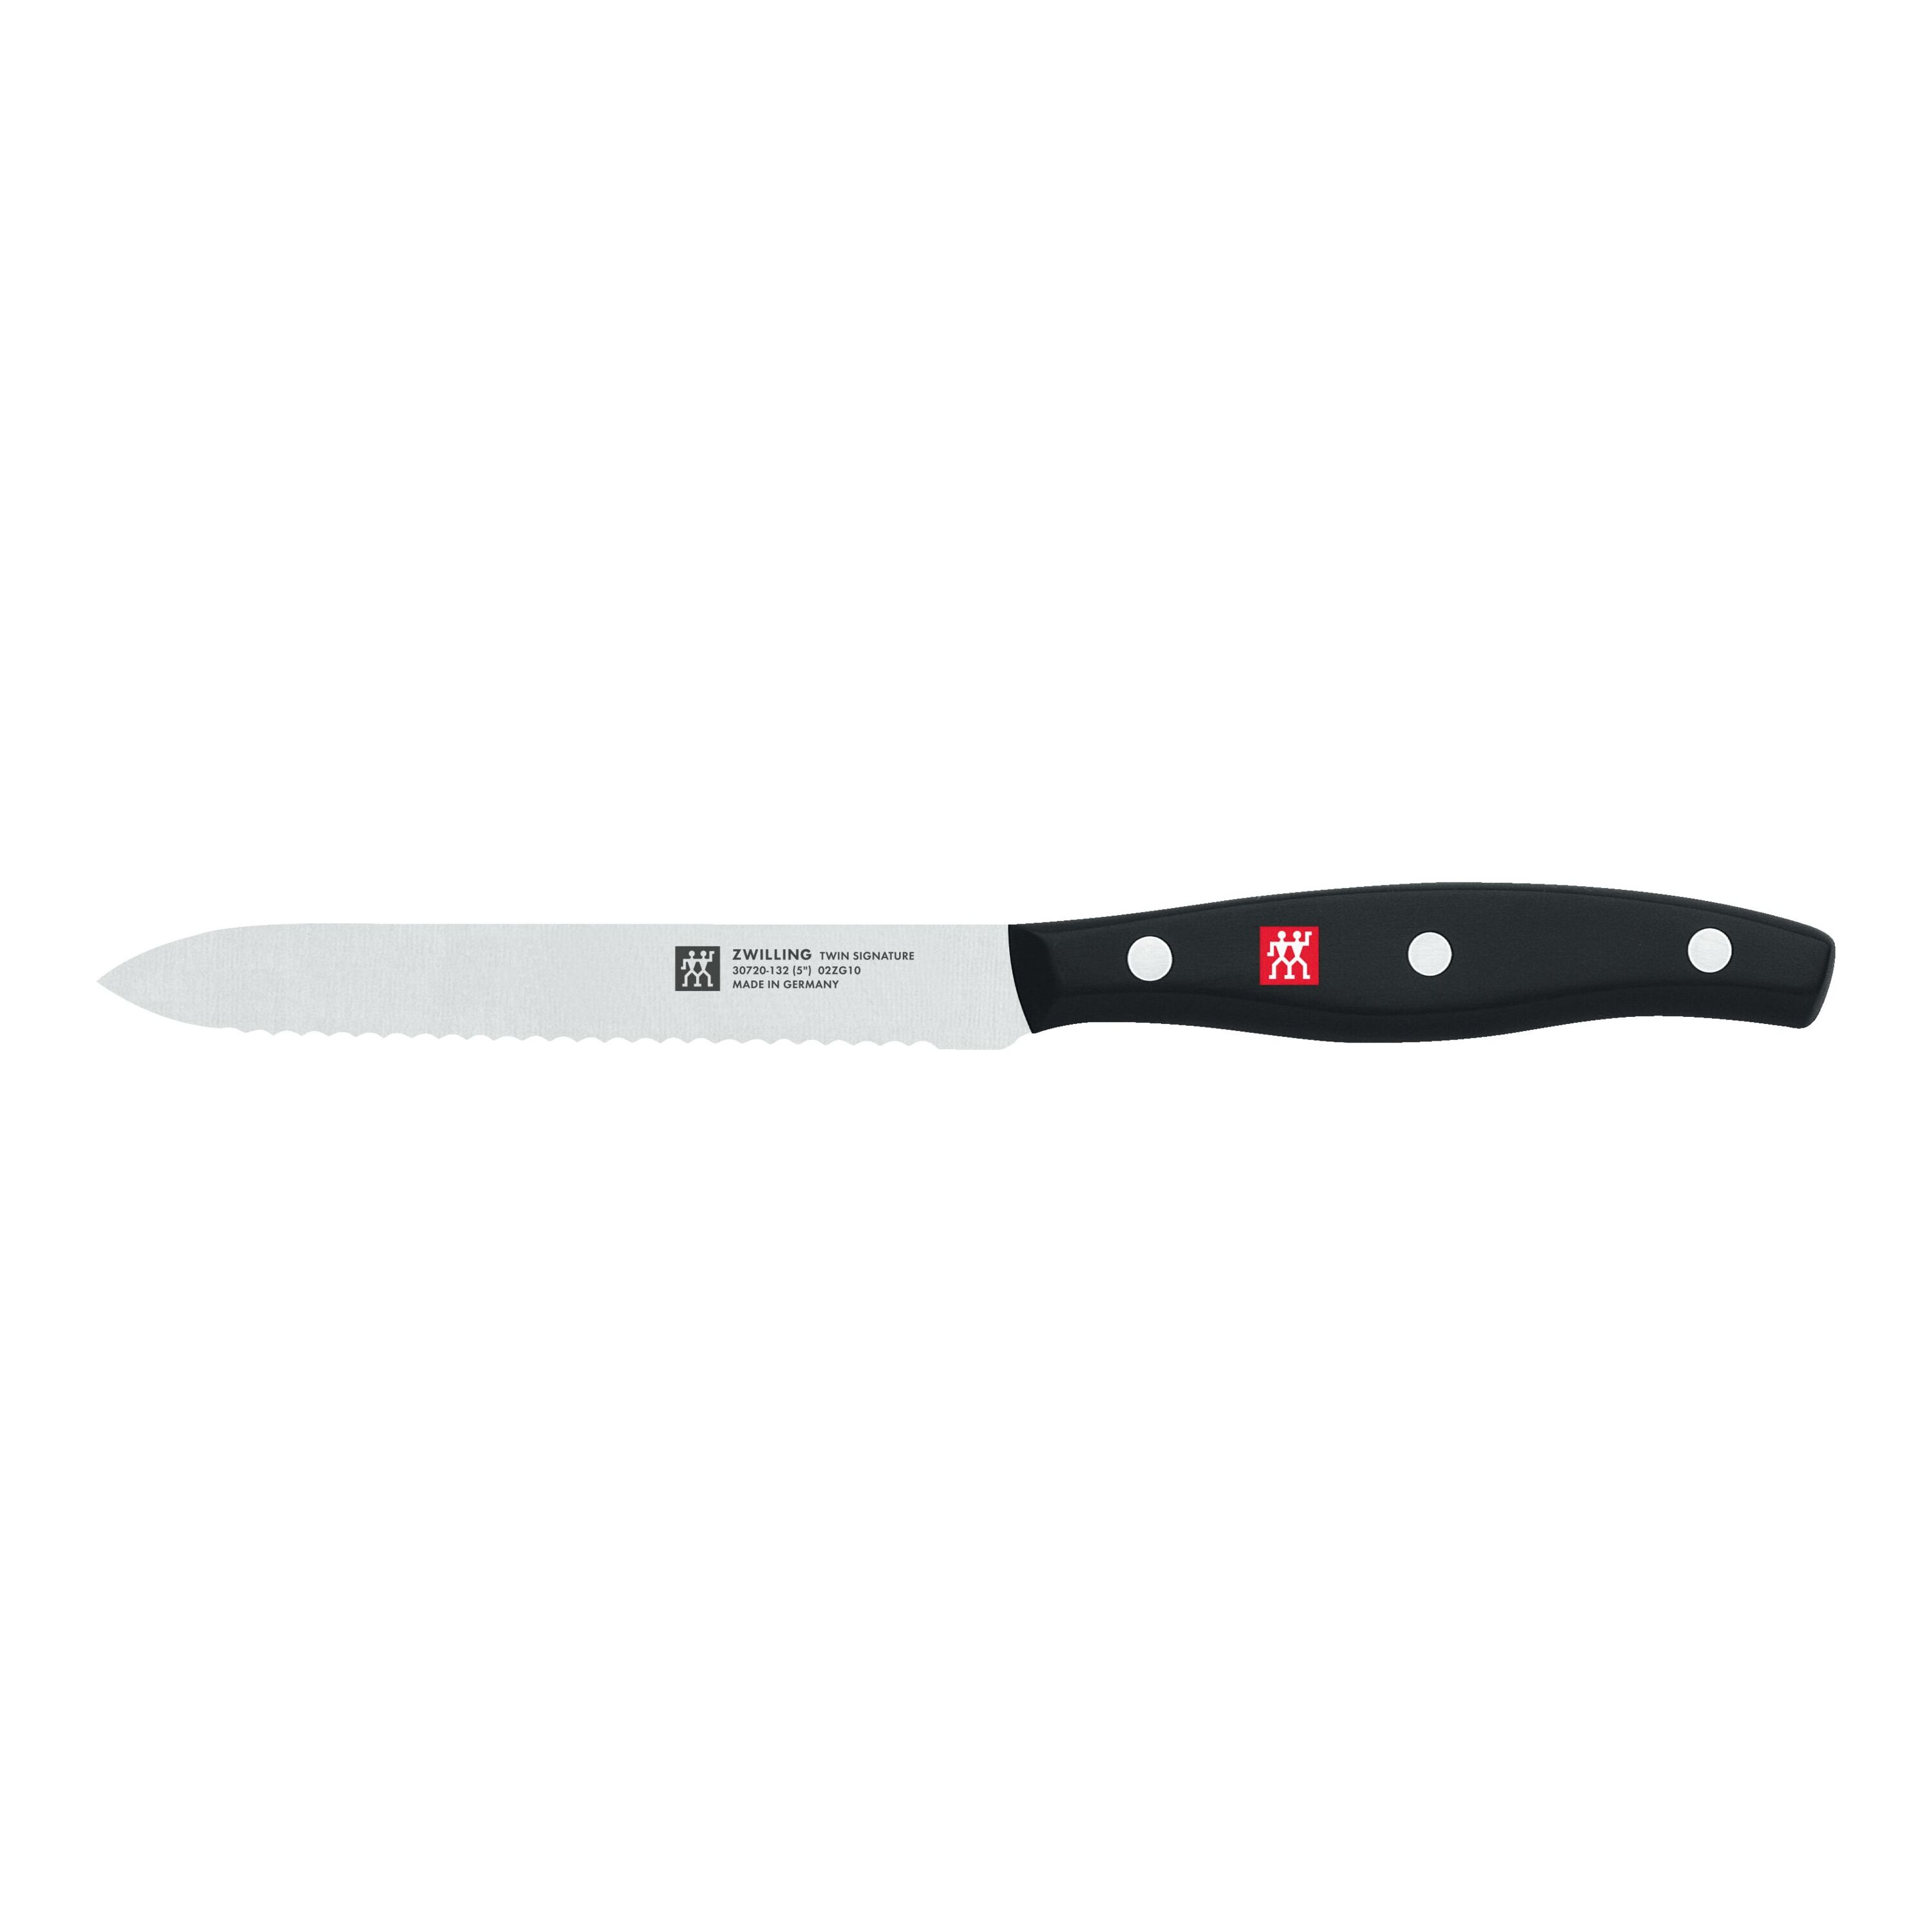 Bread Knife vs. Utility Knife: Which Type of Serrated Knife is for You?